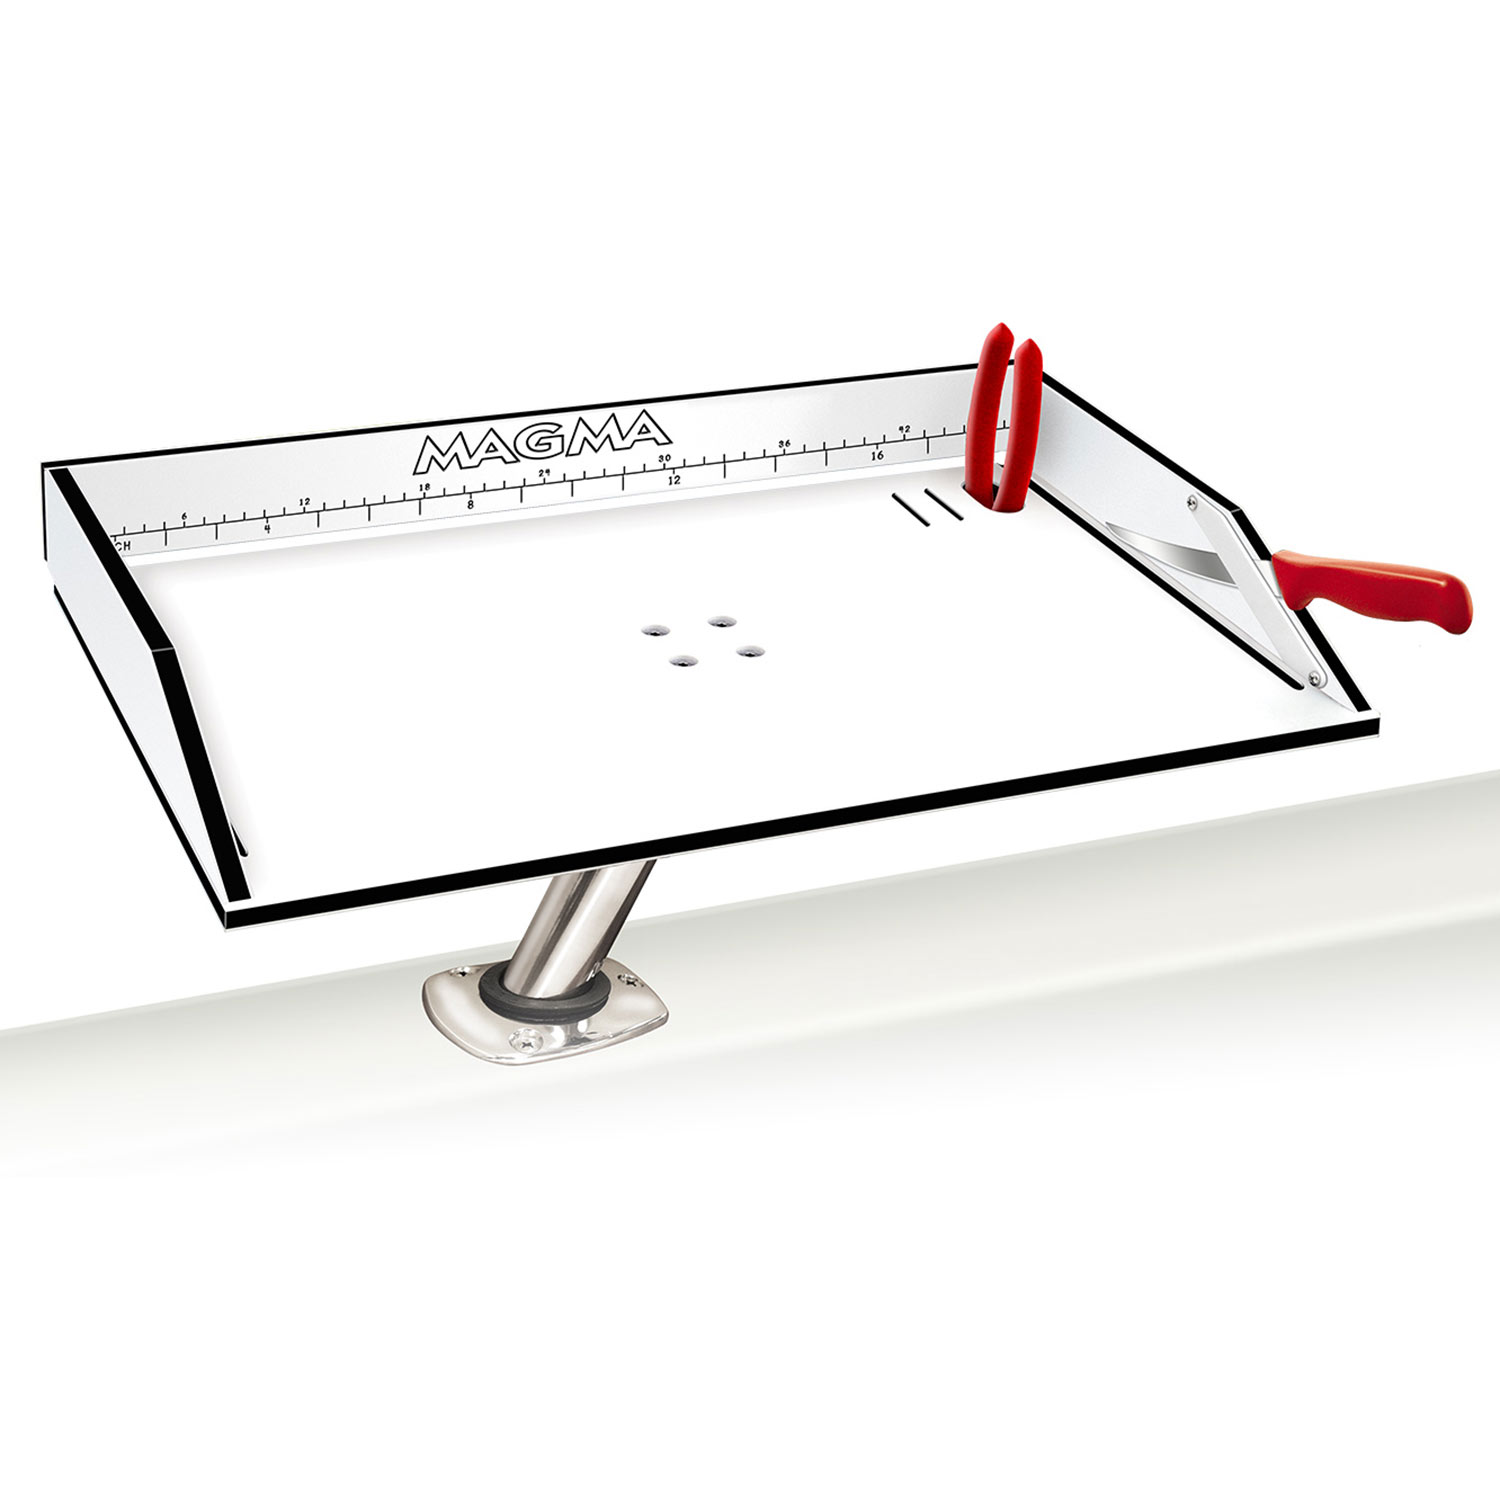 Bait/Fillet Serving Cutting Board Table, 17 7/8